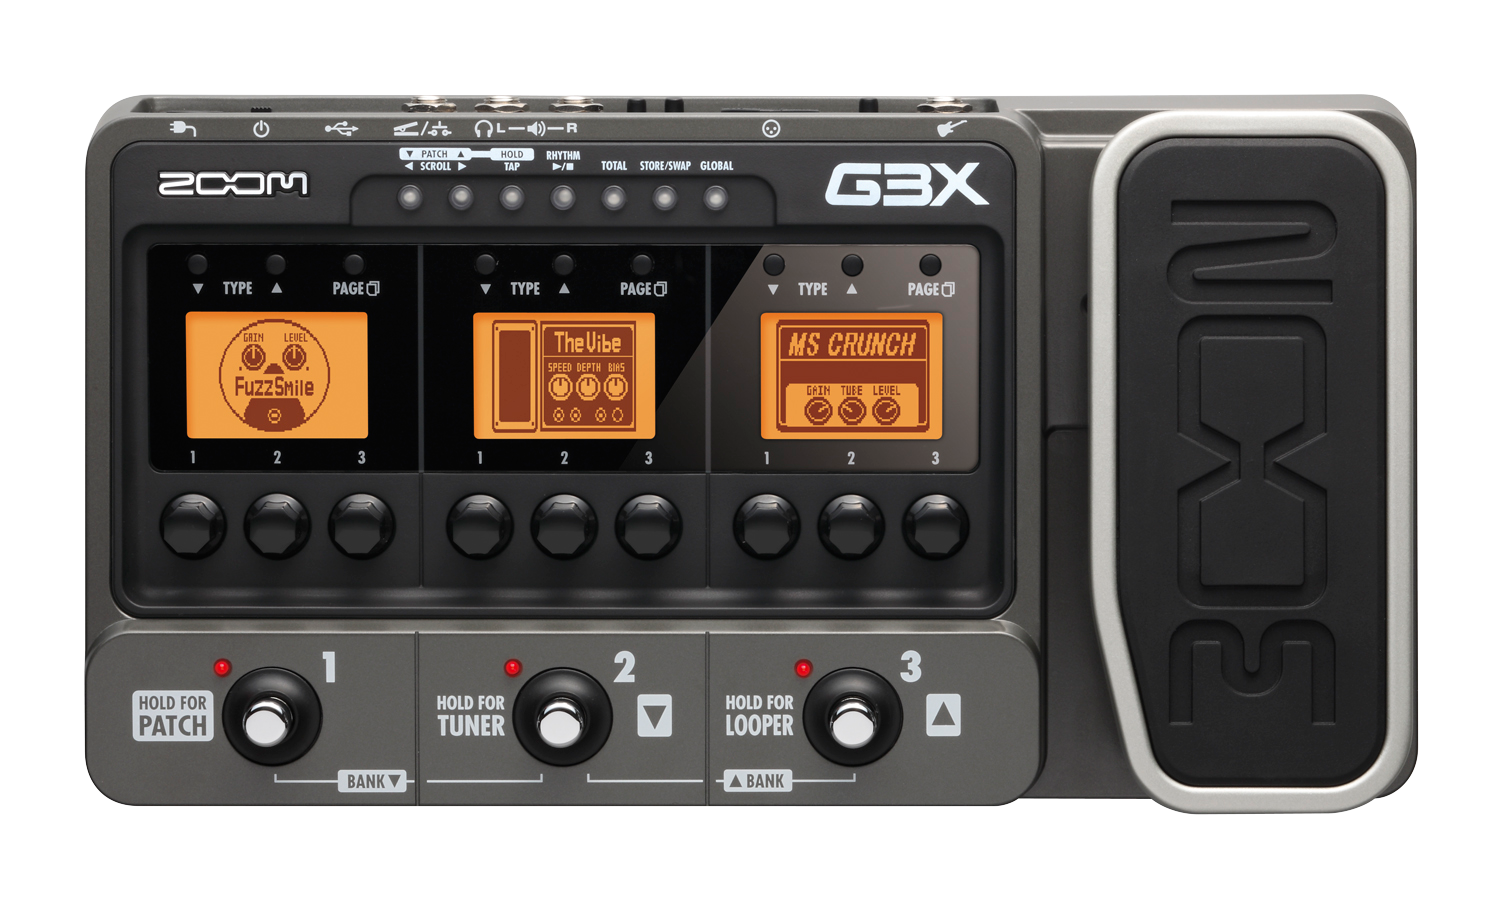 THE ZOOM G3X